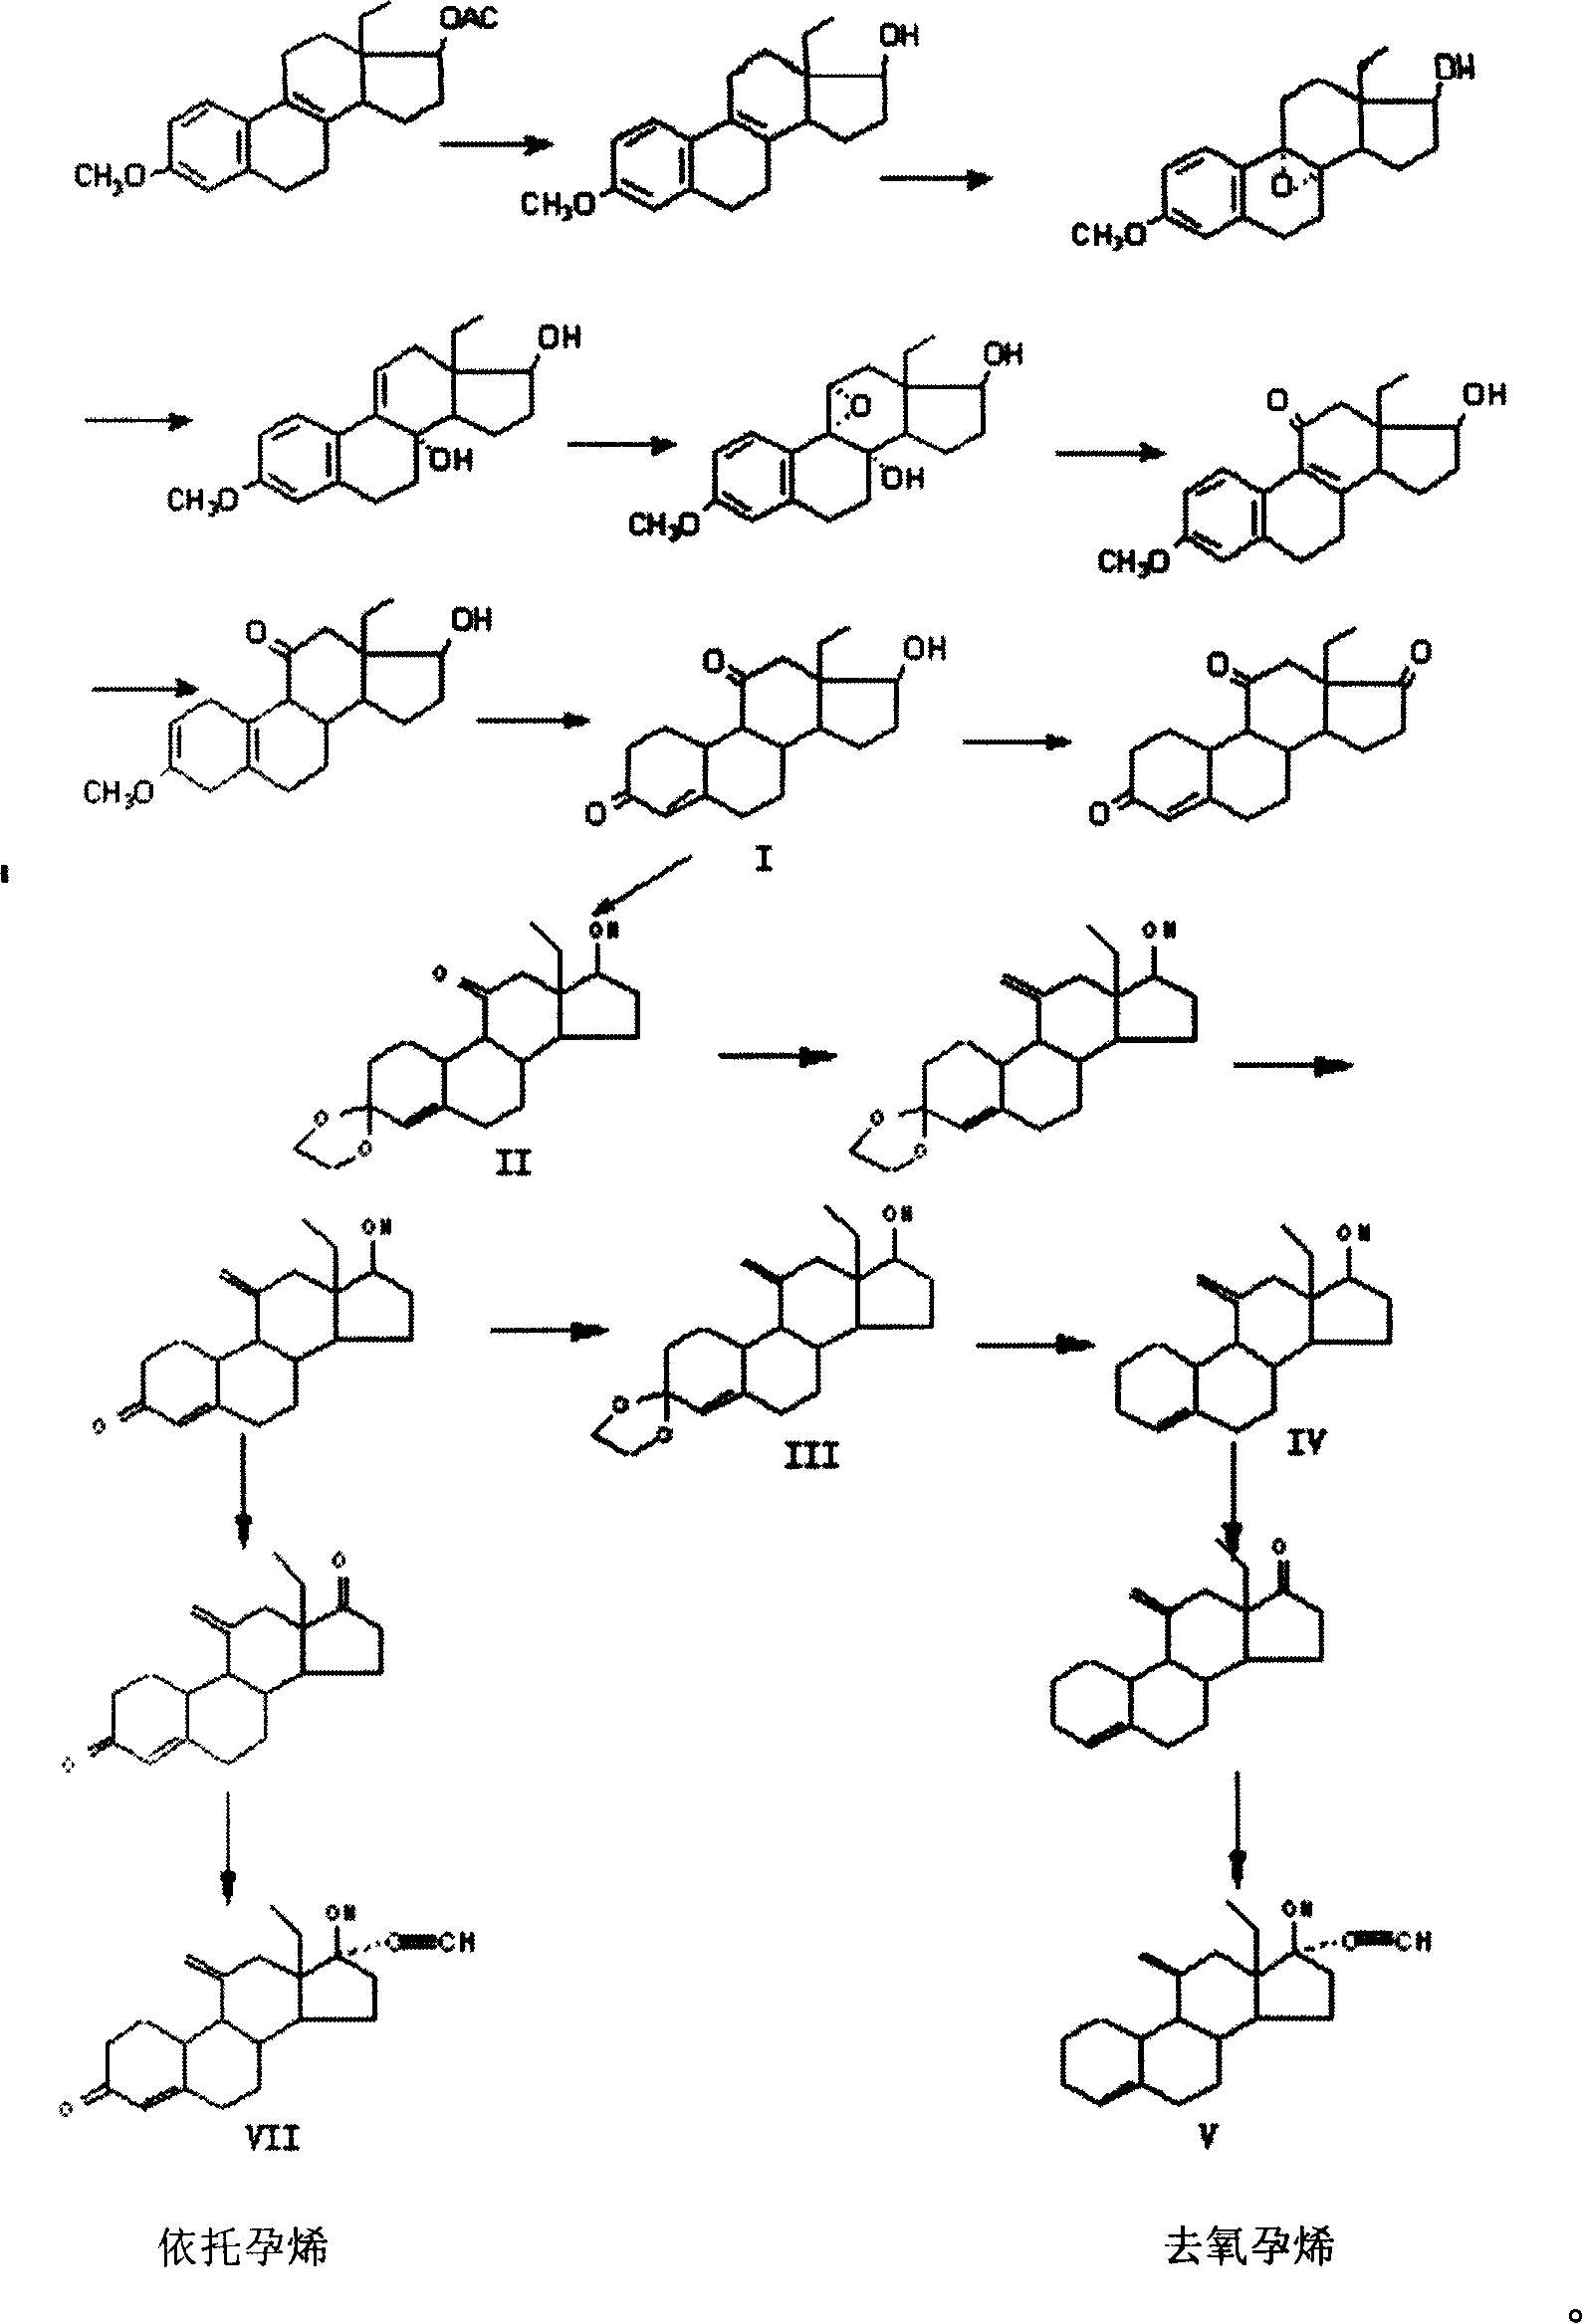 Method for synthesizing steroid progestogen